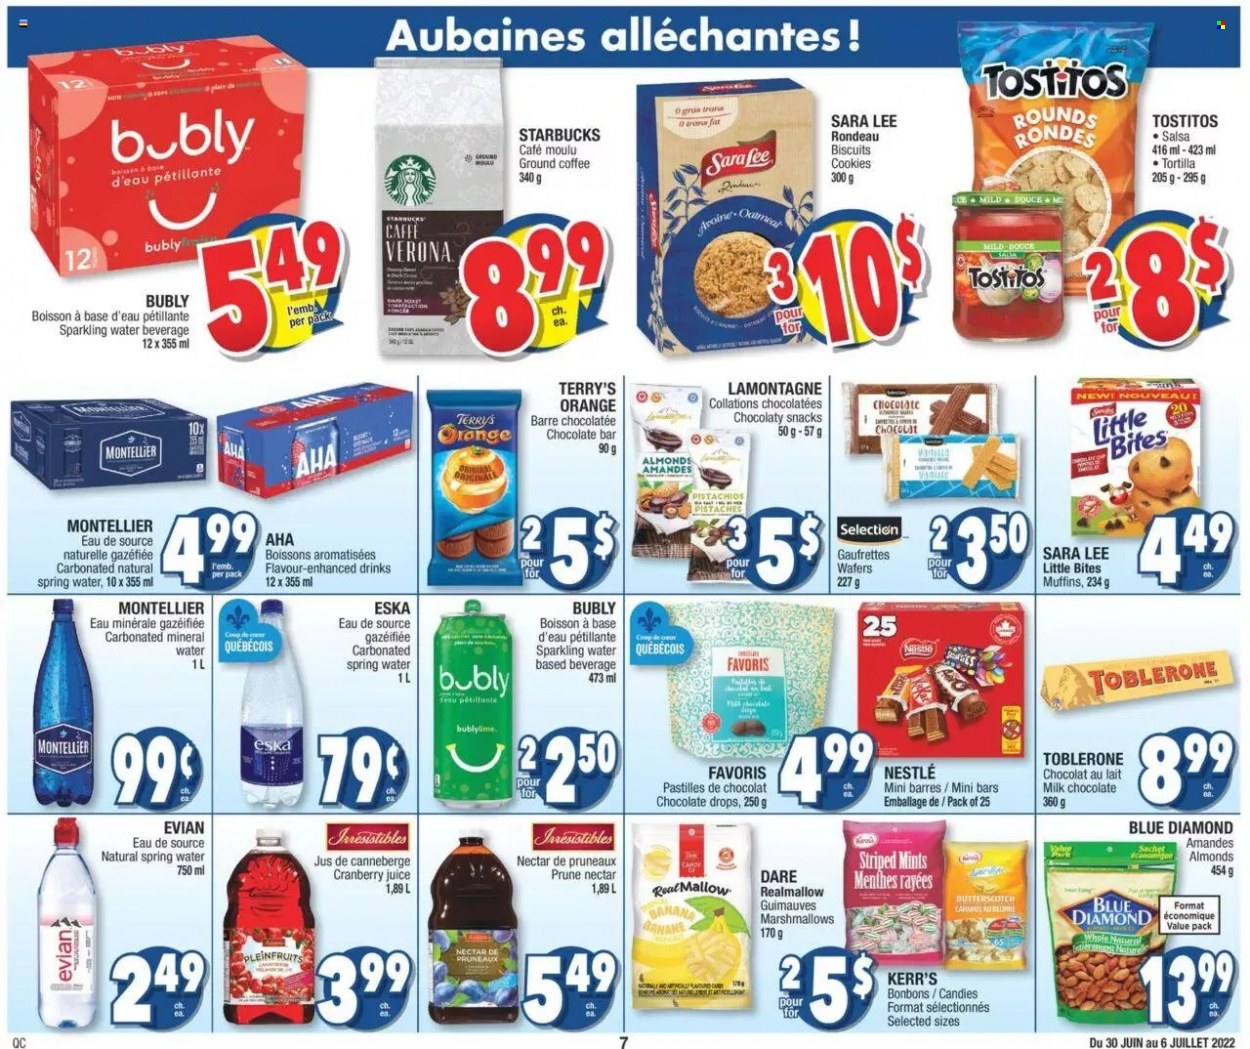 thumbnail - Jean Coutu Flyer - June 30, 2022 - July 06, 2022 - Sales products - butterscotch, cookies, marshmallows, milk chocolate, wafers, muffin, biscuit, Toblerone, pastilles, Little Bites, chocolate bar, tortillas, Tostitos, salsa, almonds, Blue Diamond, cranberry juice, juice, mineral water, spring water, sparkling water, Evian, coffee, ground coffee, Starbucks, Nestlé. Page 7.